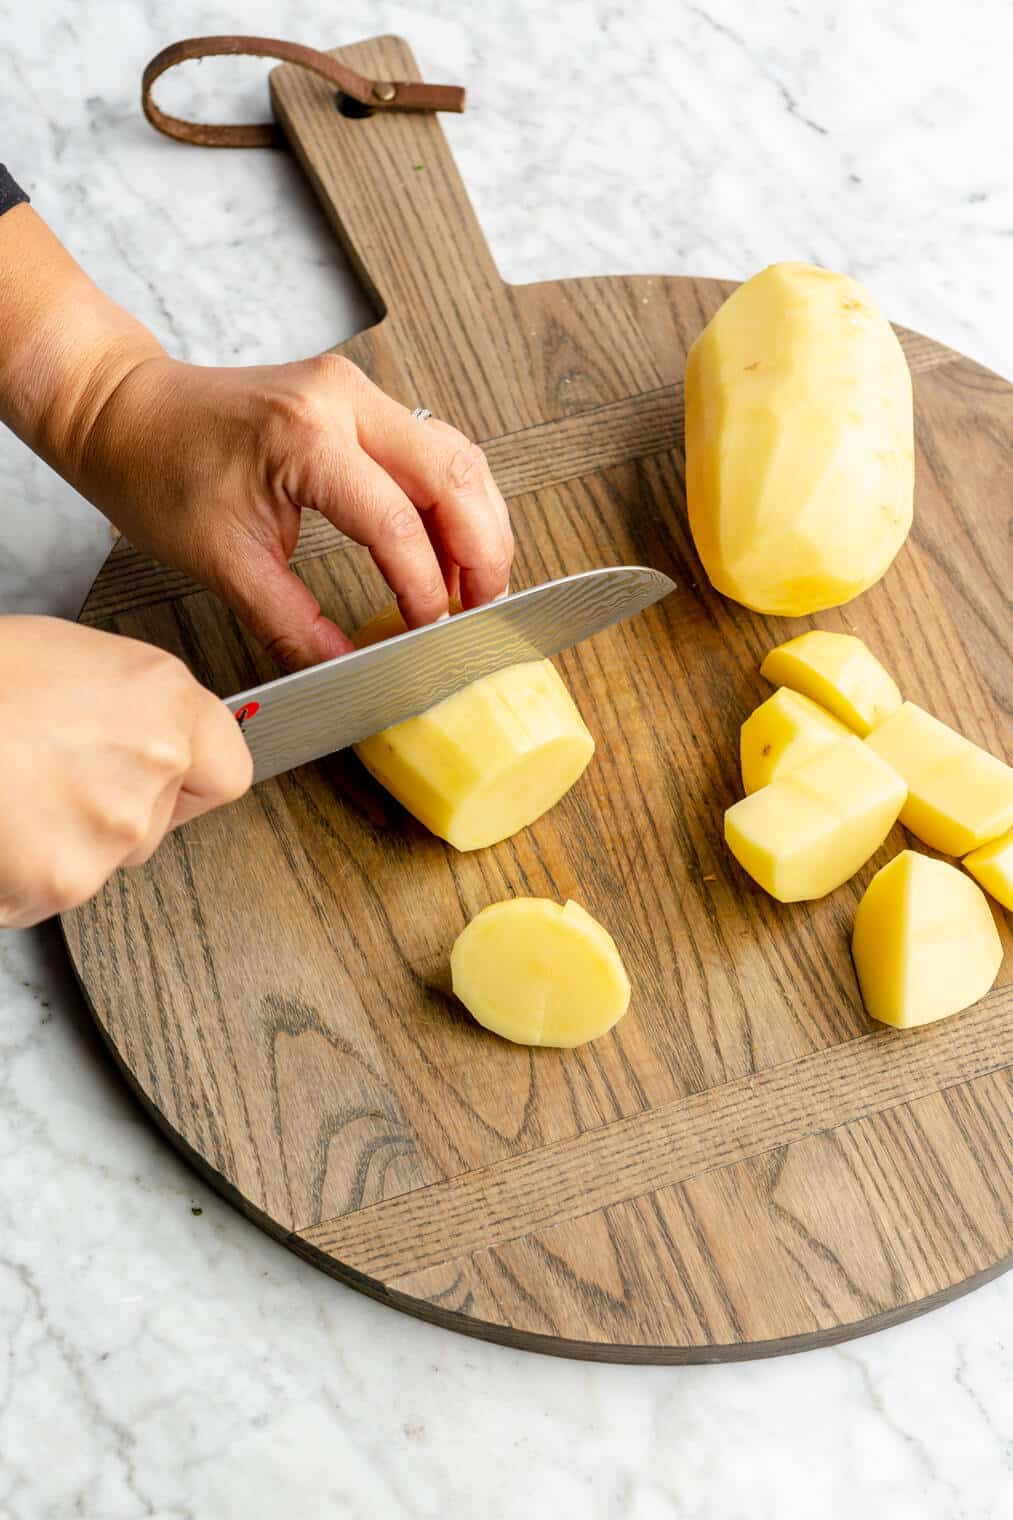 Hand holding a knife and cubing potatoes on a wooden cutting board.